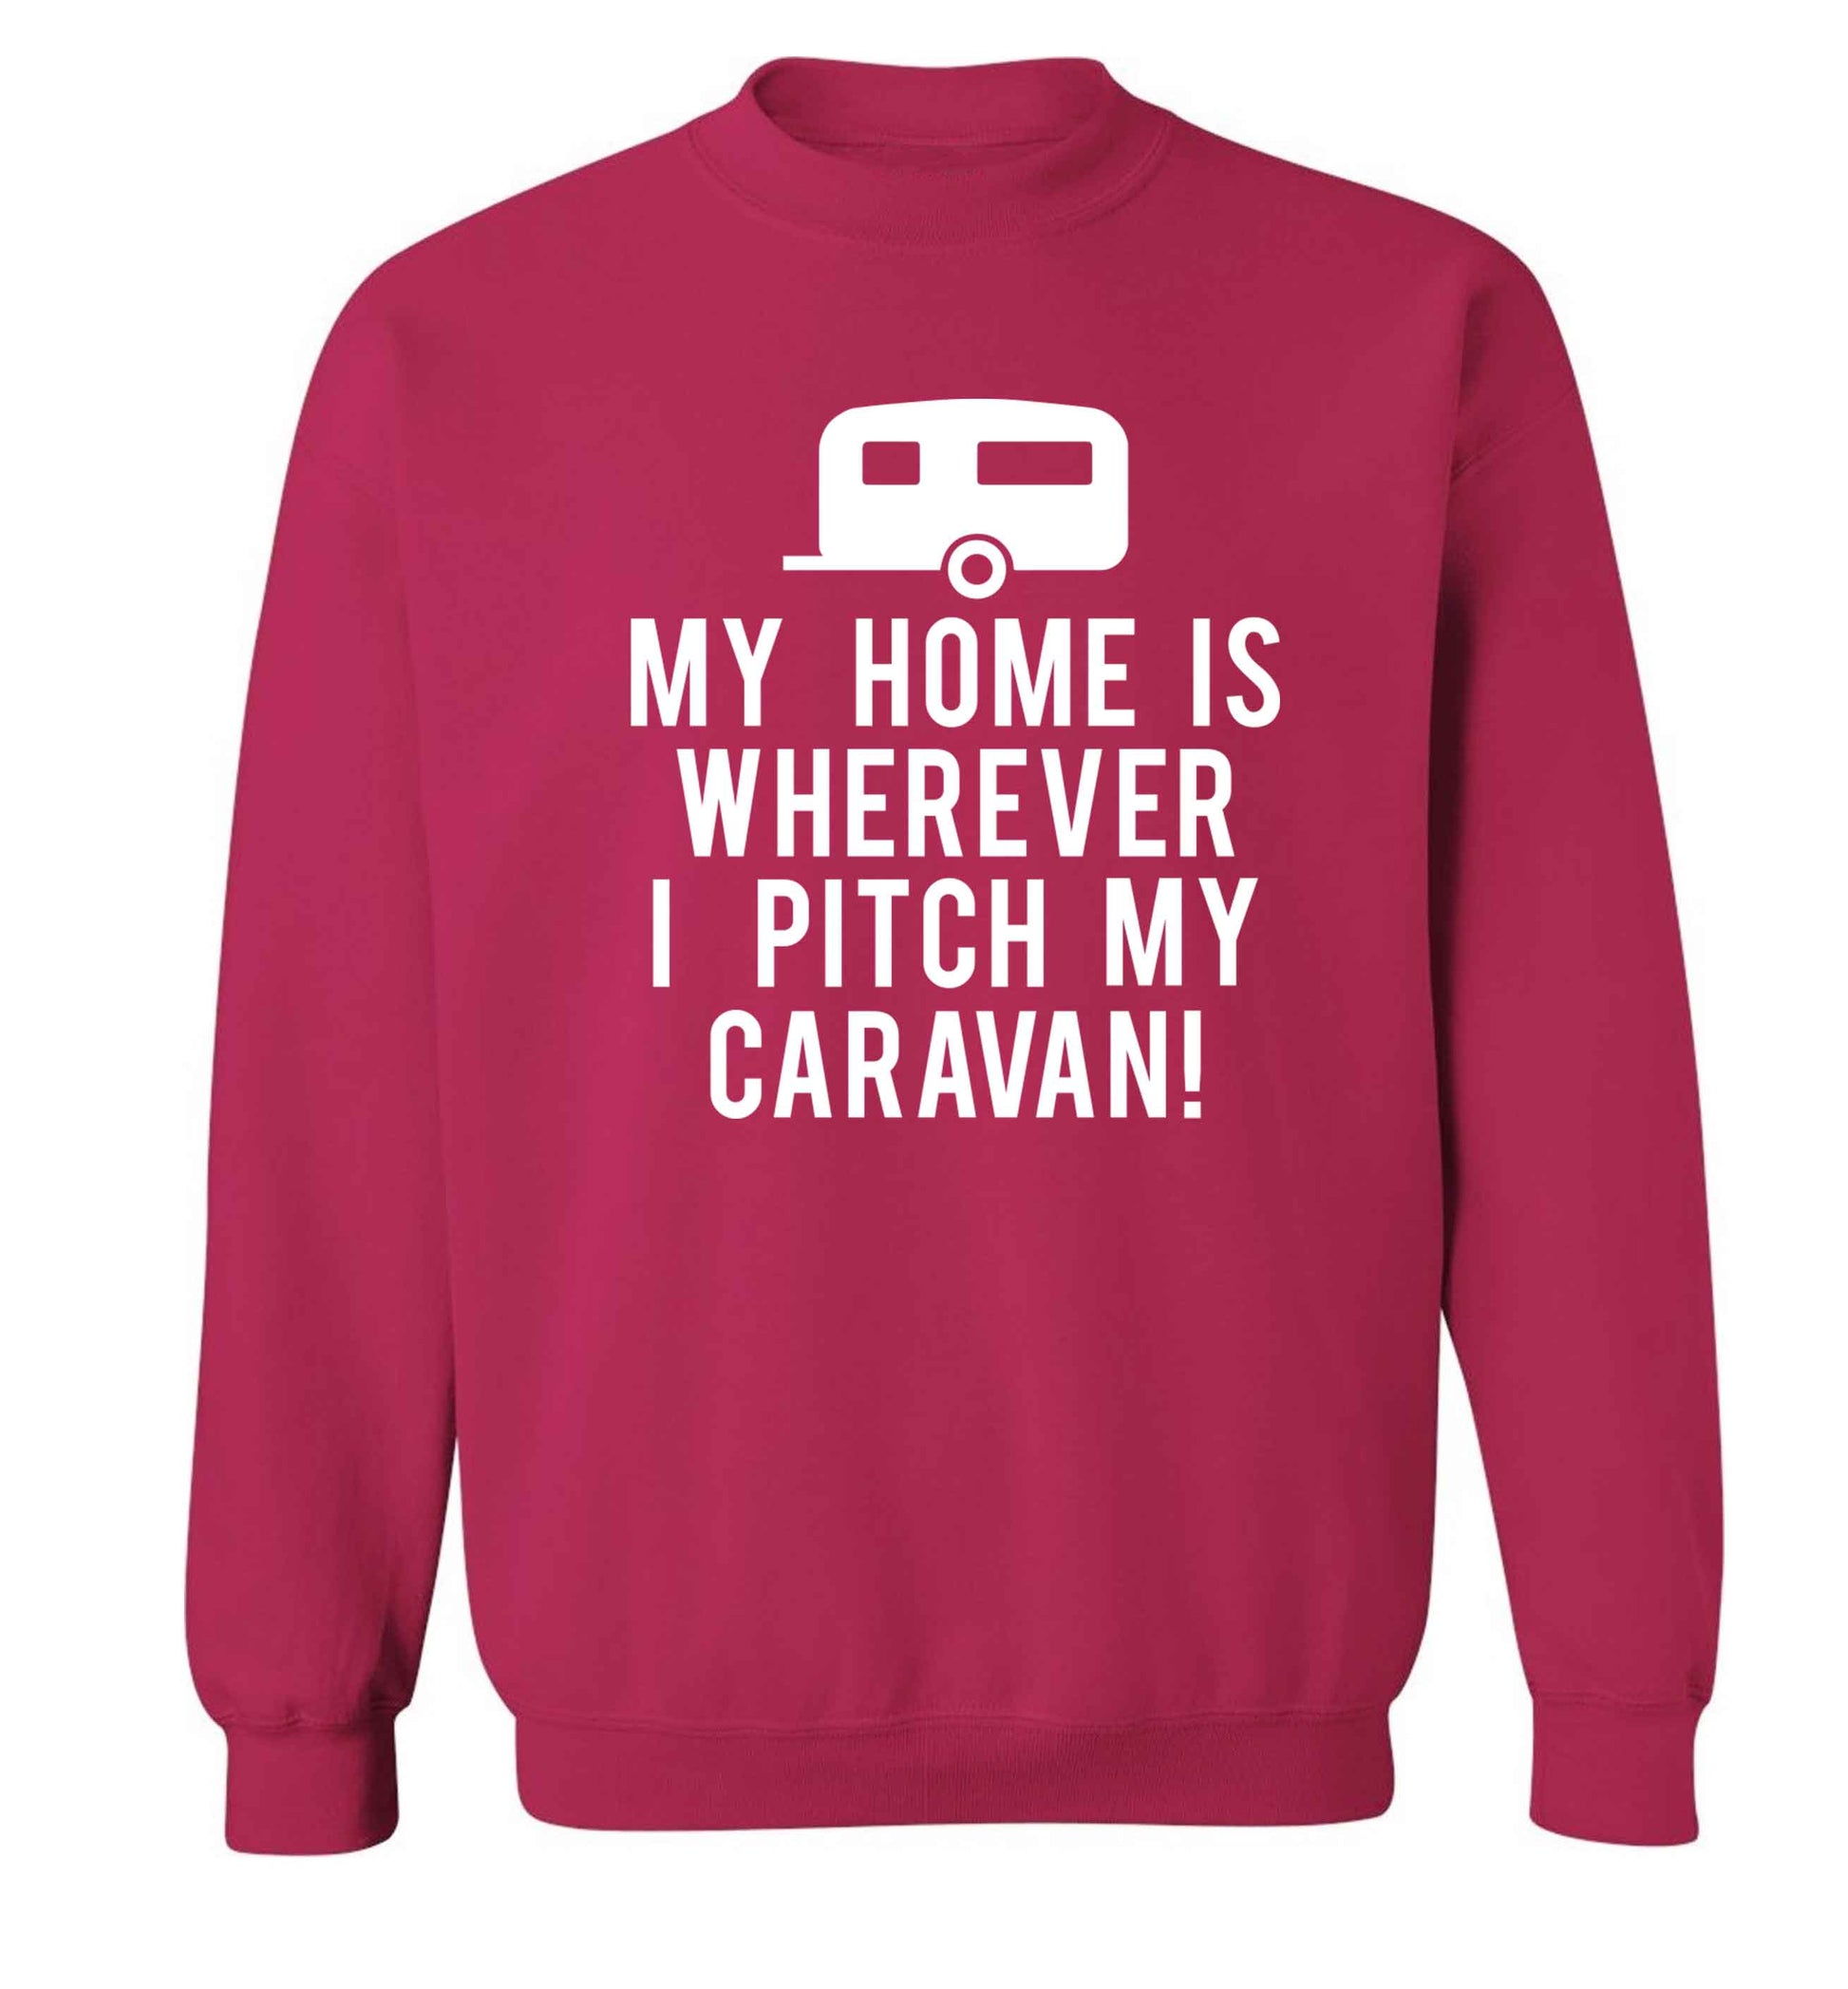 My home is wherever I pitch my caravan Adult's unisex pink Sweater 2XL